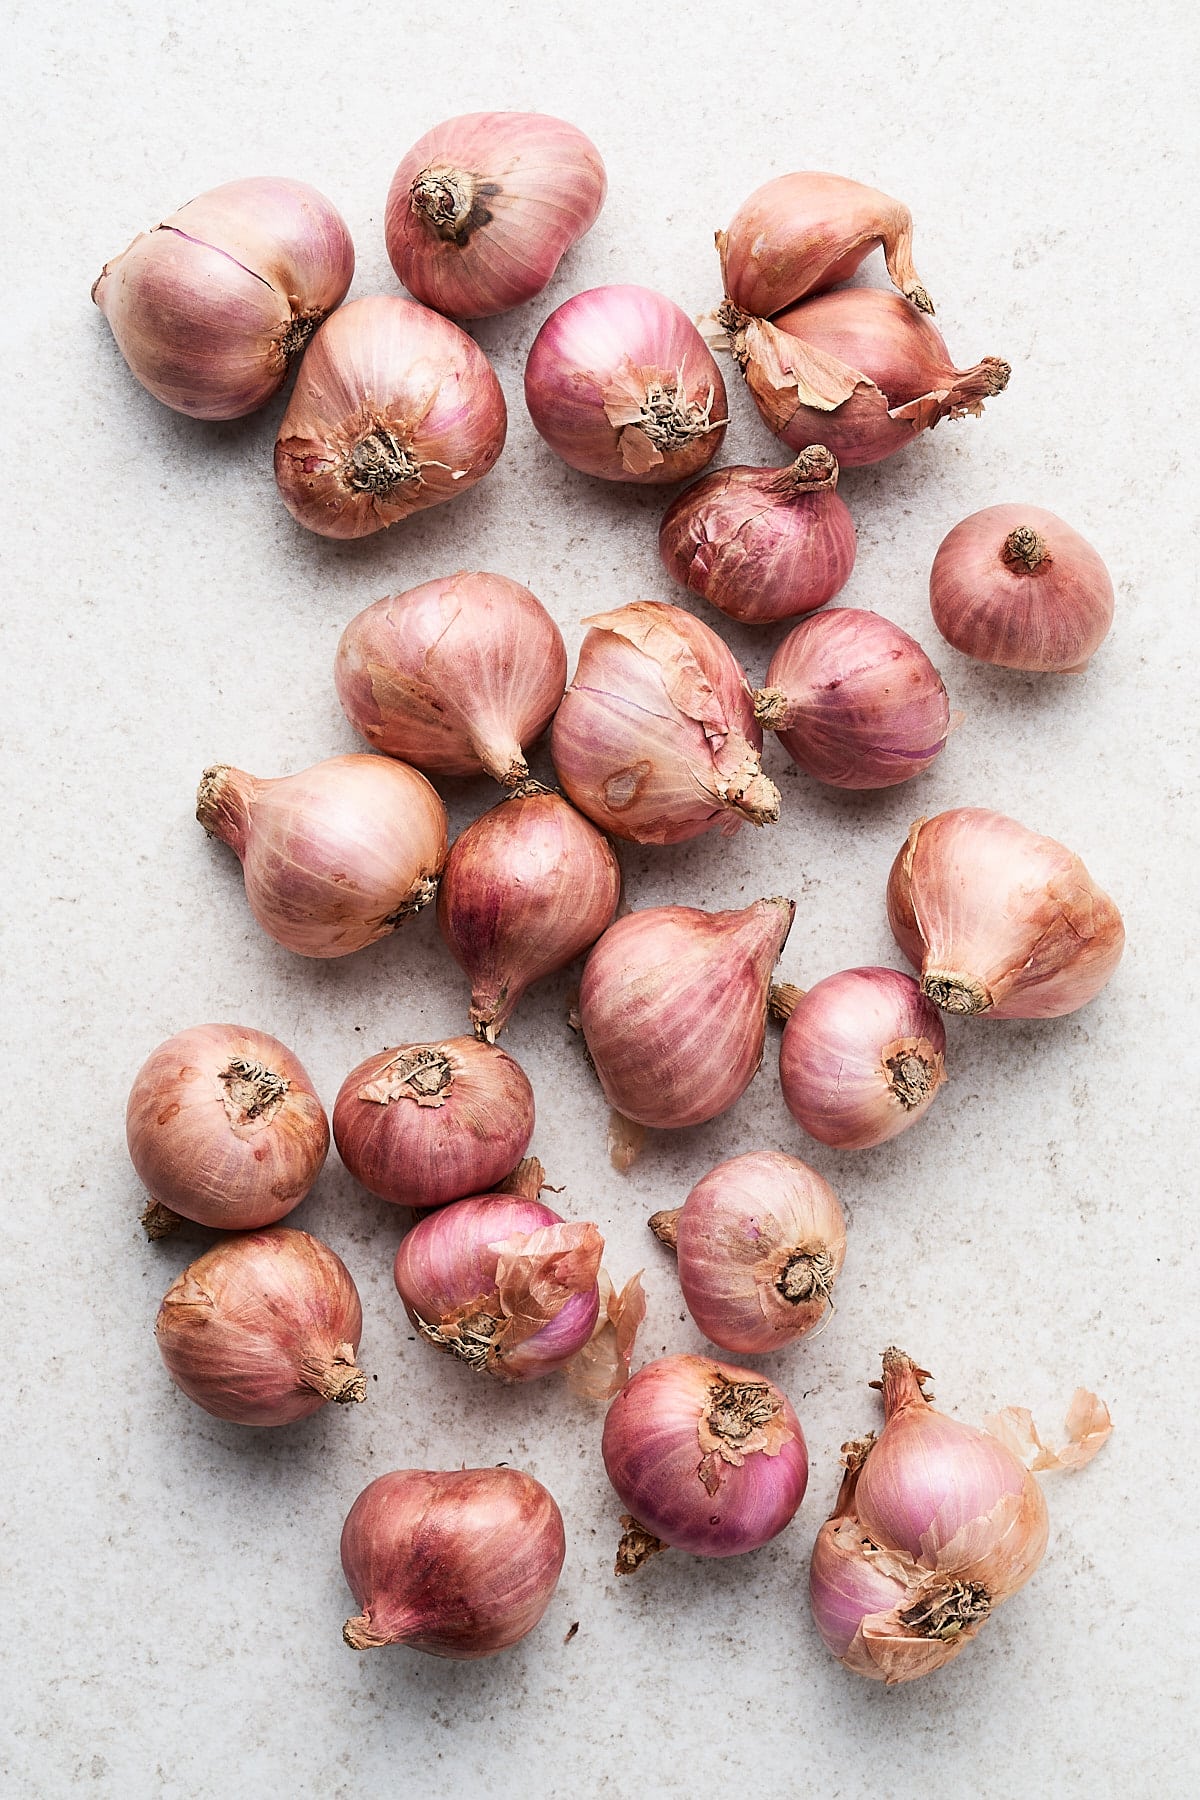 Shallots on a table.